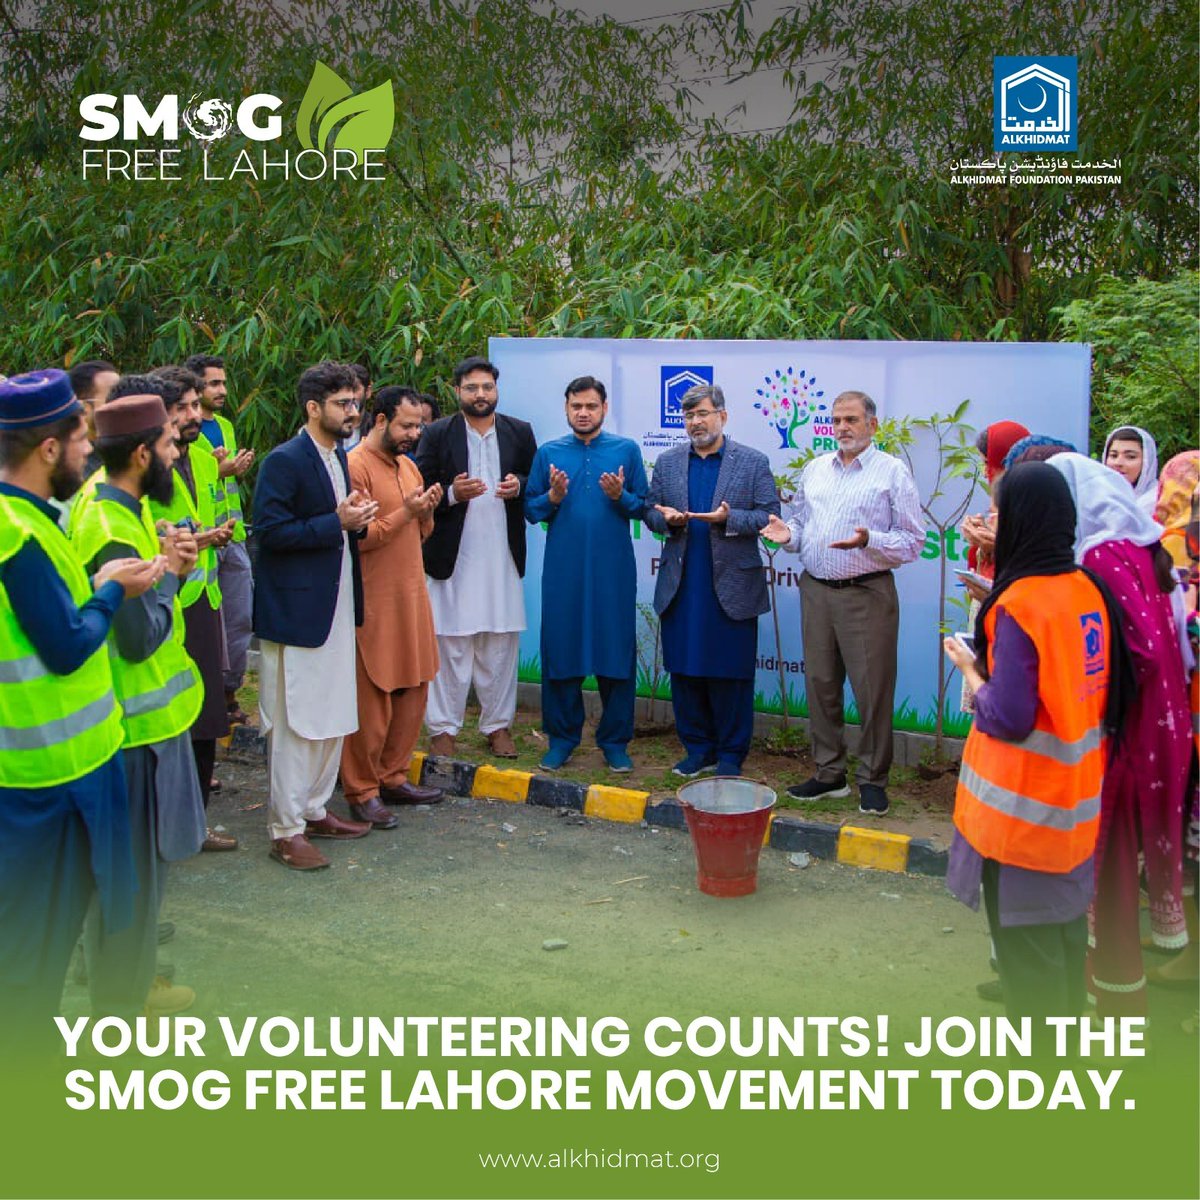 'Join the movement for a pollution-free Lahore! It's time to reclaim our skies and prioritize clean air for everyone. Together, we can make a difference. 🌍🌱 #SmogFreeLahore #CleanAirNow #SustainableCity #BreatheEasy